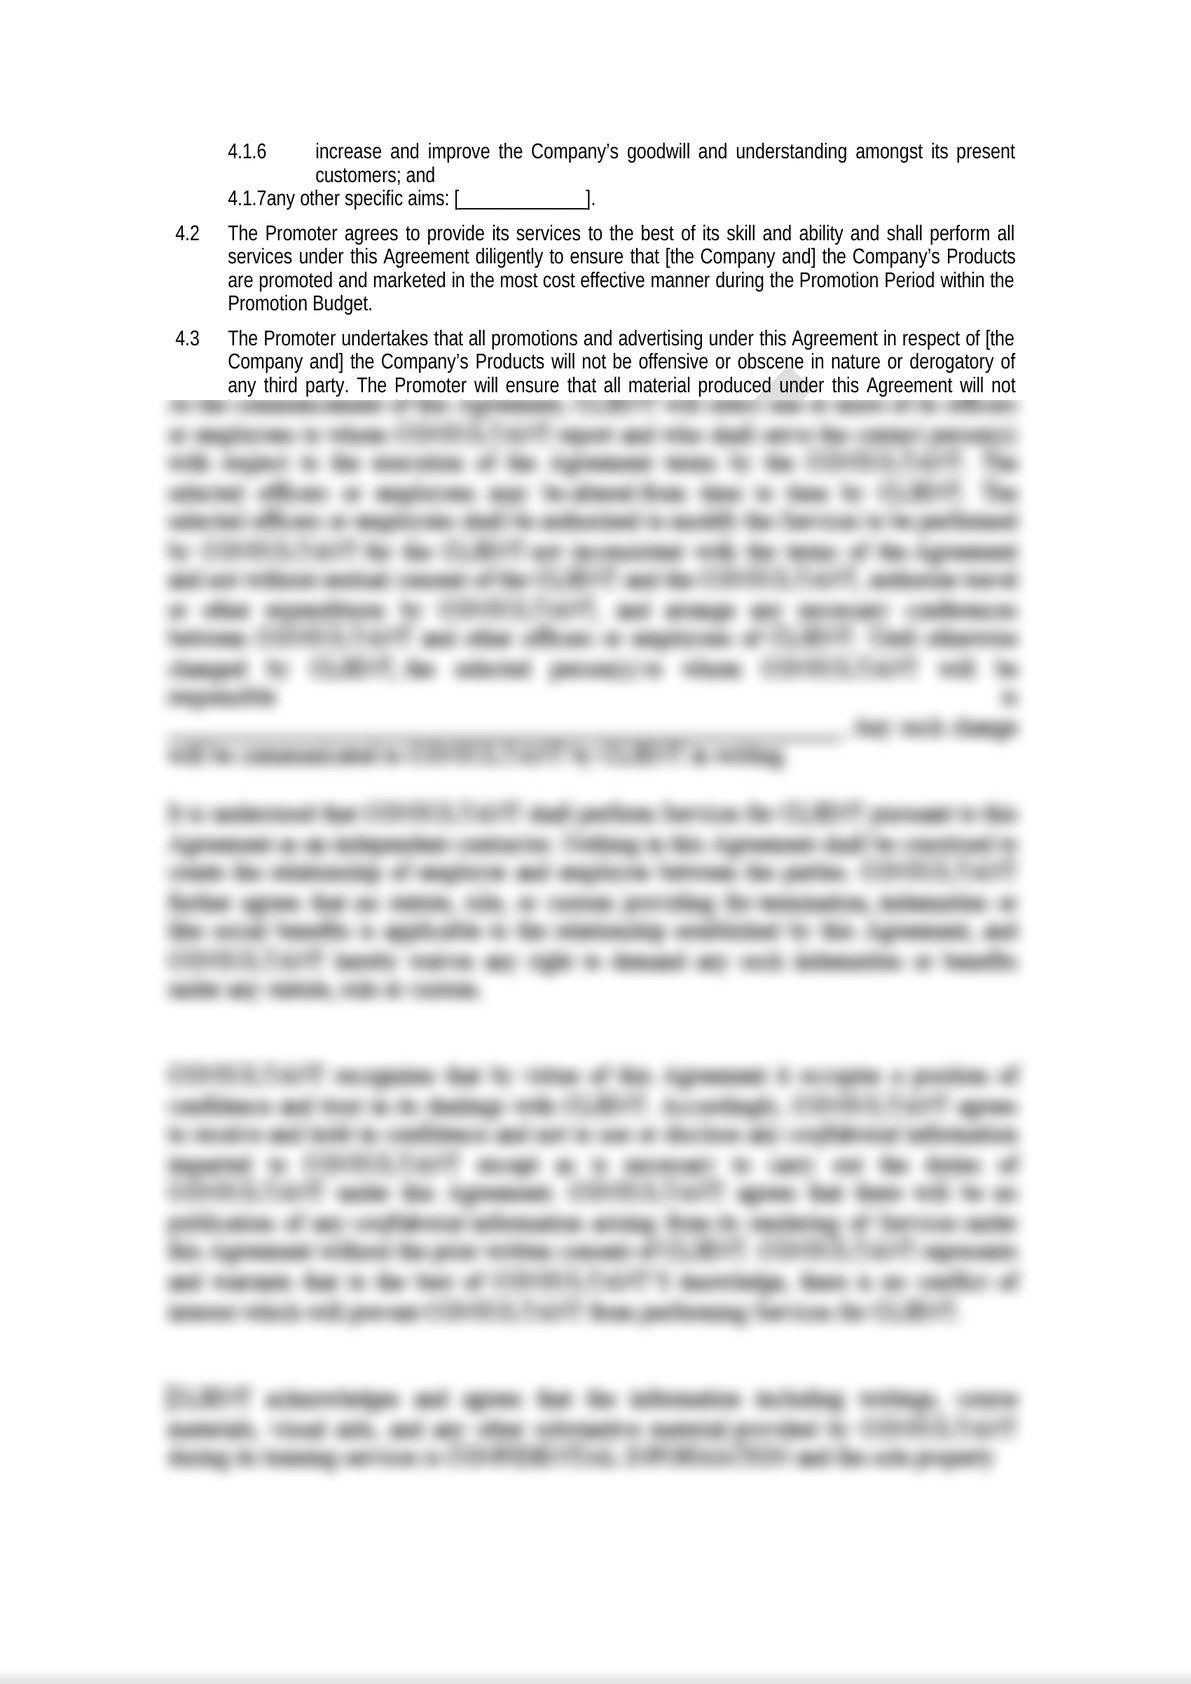 General Advertising & Promotion Agreement (Media Law)-1